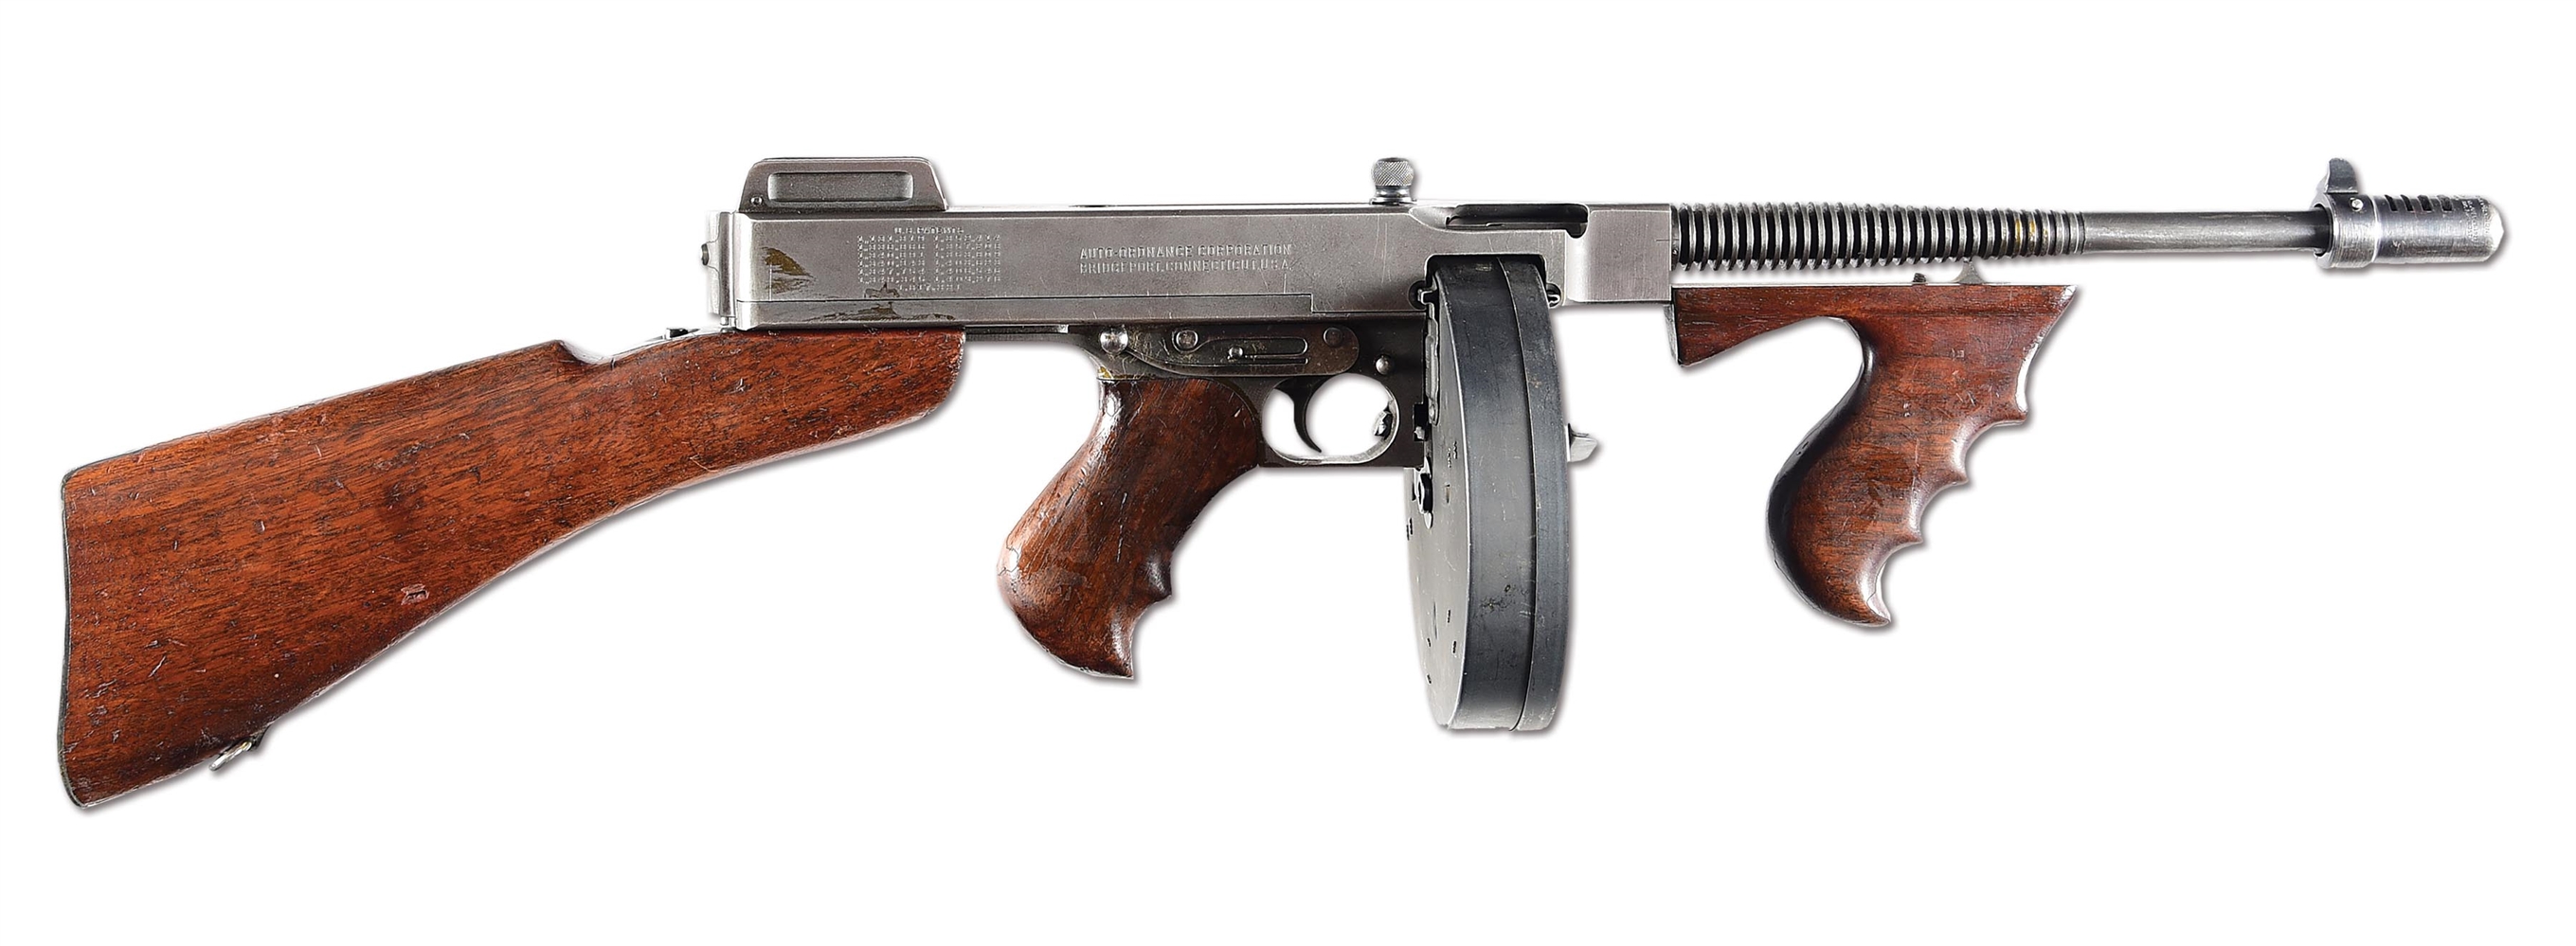 (N) EXTREMELY RARE COMMERCIAL SAVAGE MODEL 1921 OVERSTAMP THOMPSON MACHINE GUN (CURIO AND RELIC).